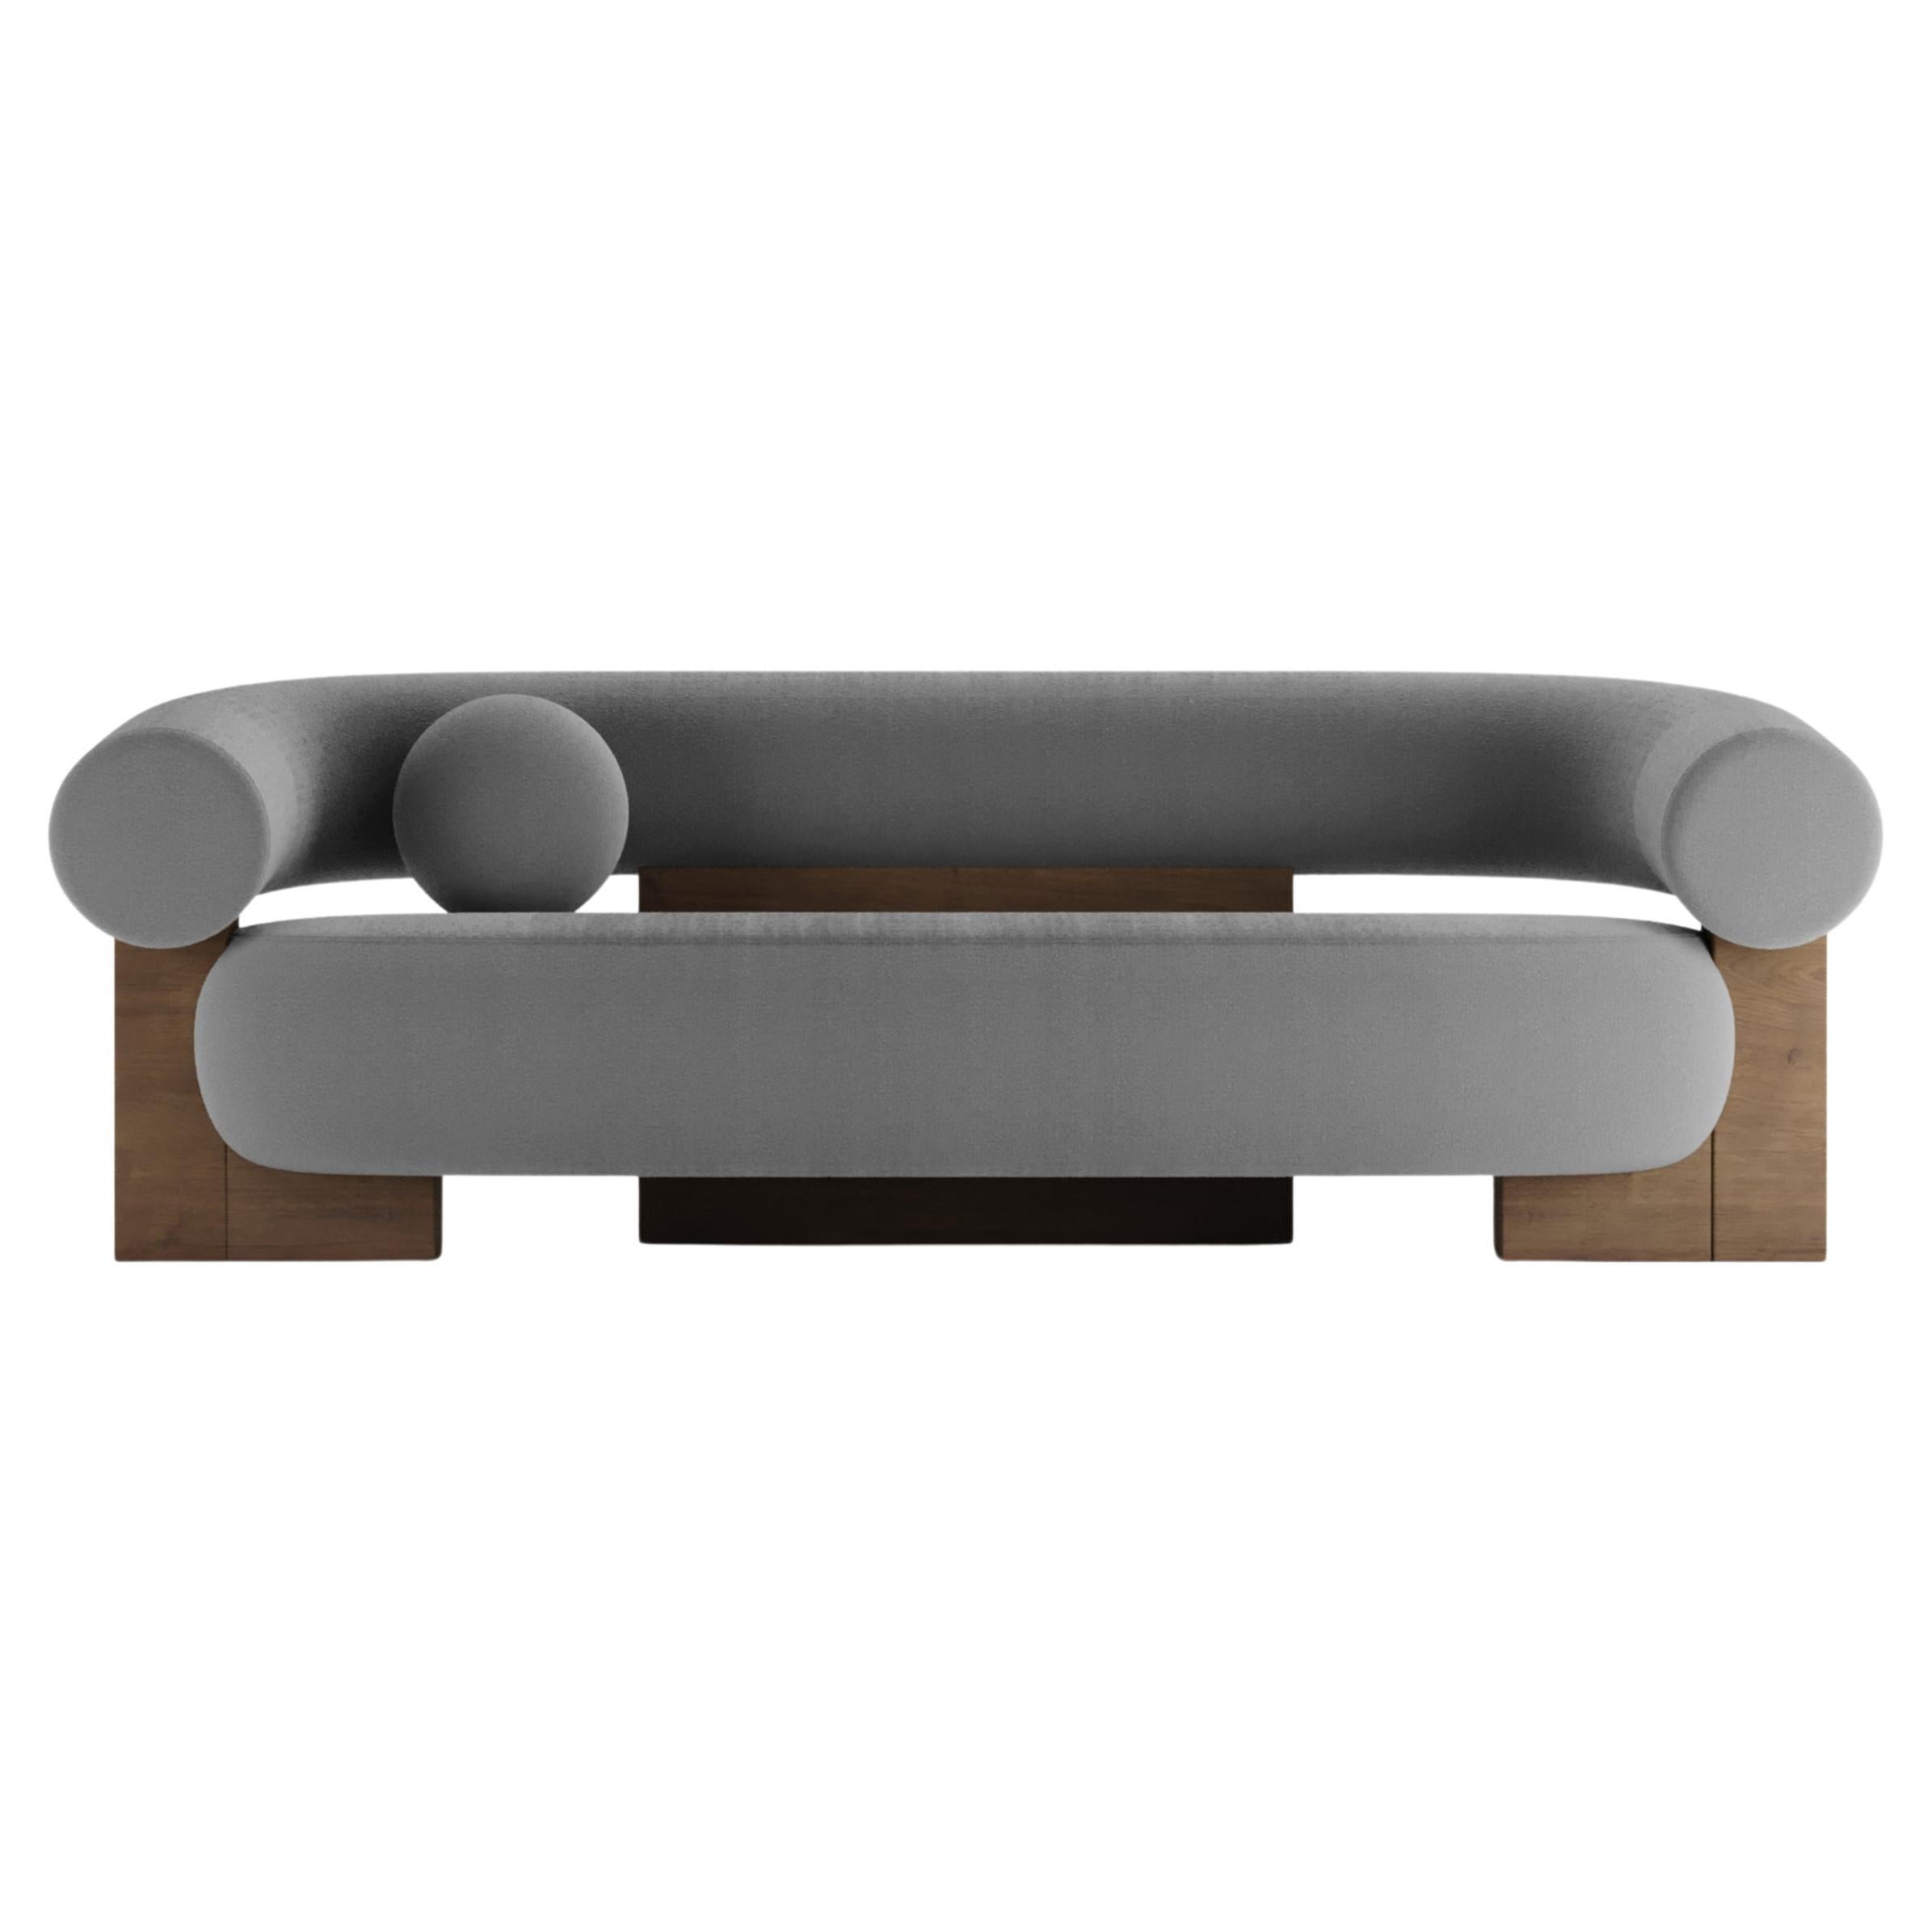 Contemporary Modern Cassete Sofa in Light Grey & Wood by Collector Studio For Sale